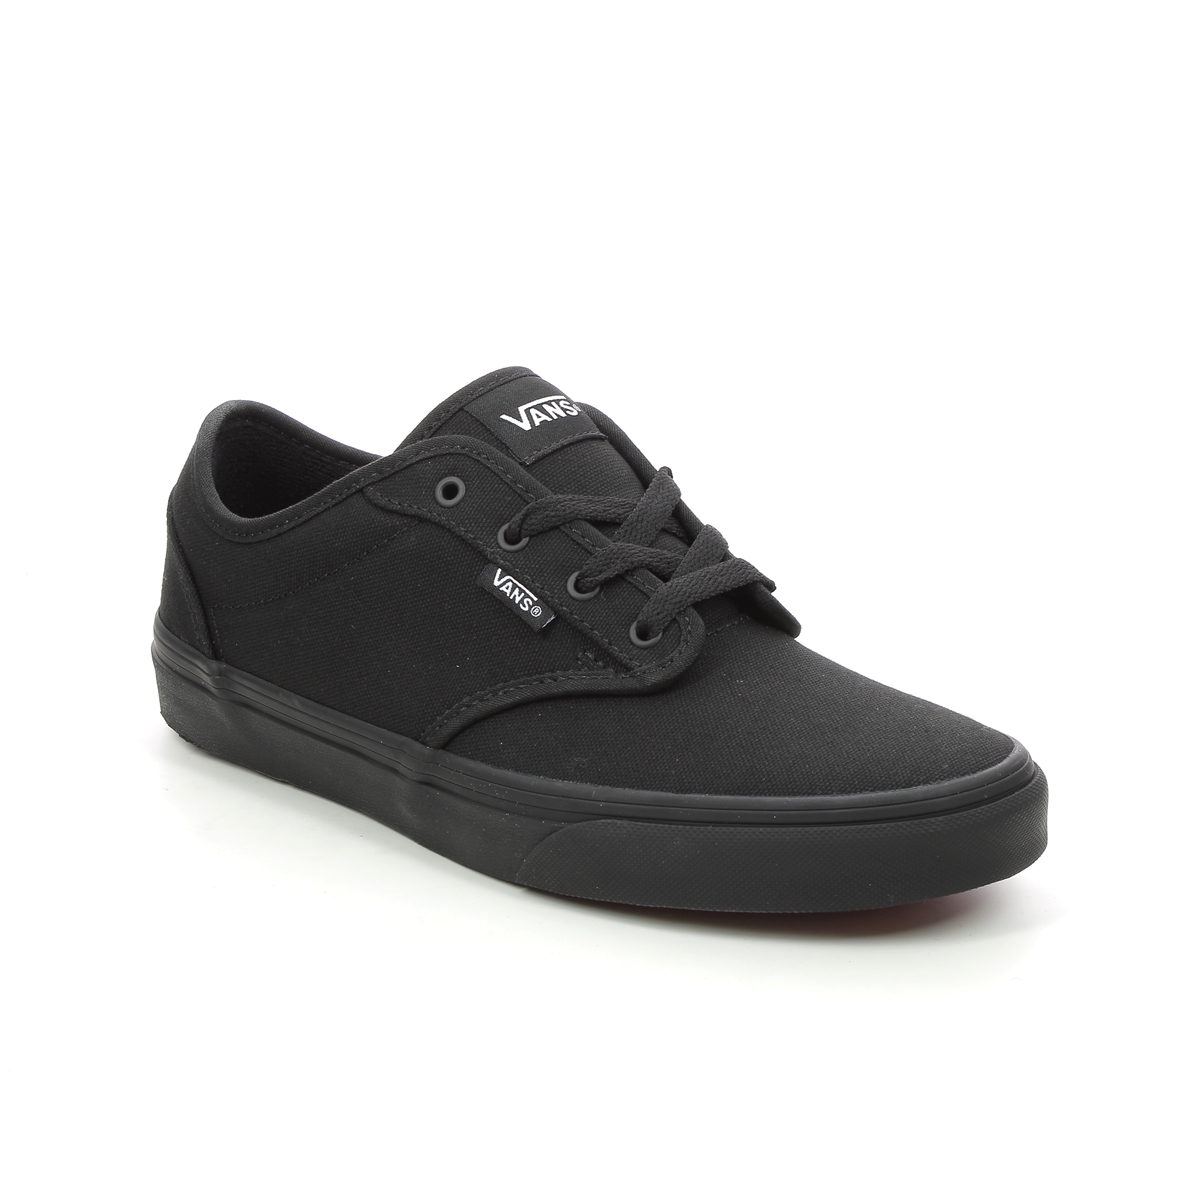 Vans Atwood Youth Black Kids Trainers  Vki5186 In Size 3 In Plain Black Vans Boys Trainers For School For kids